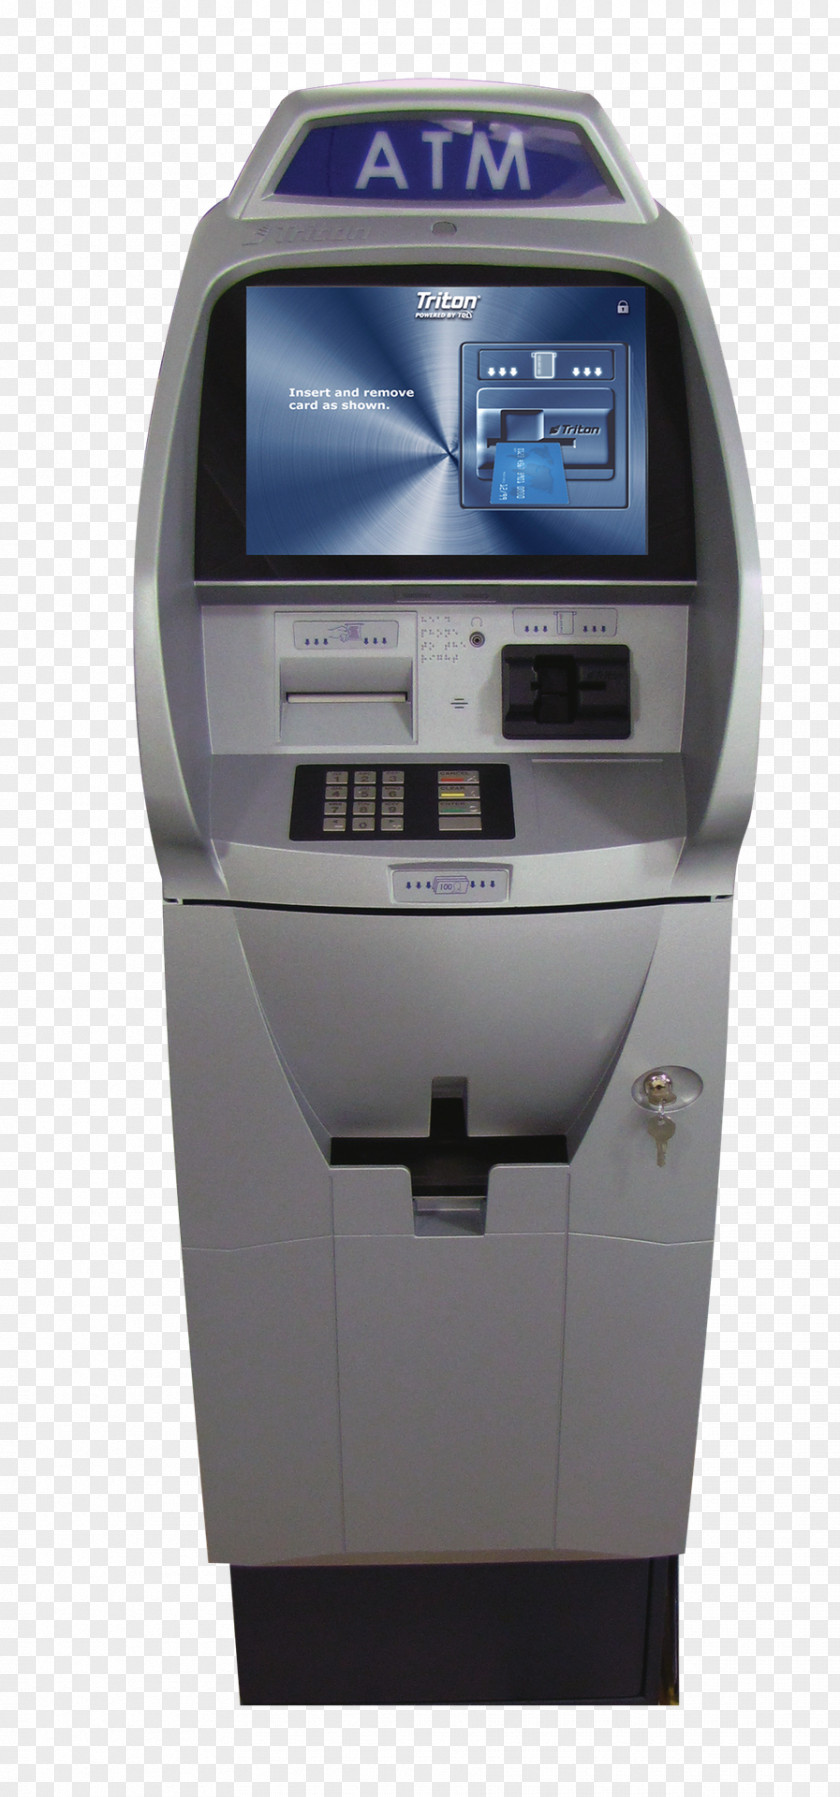 Atm Automated Teller Machine Touchscreen Triton Bank Display Device PNG